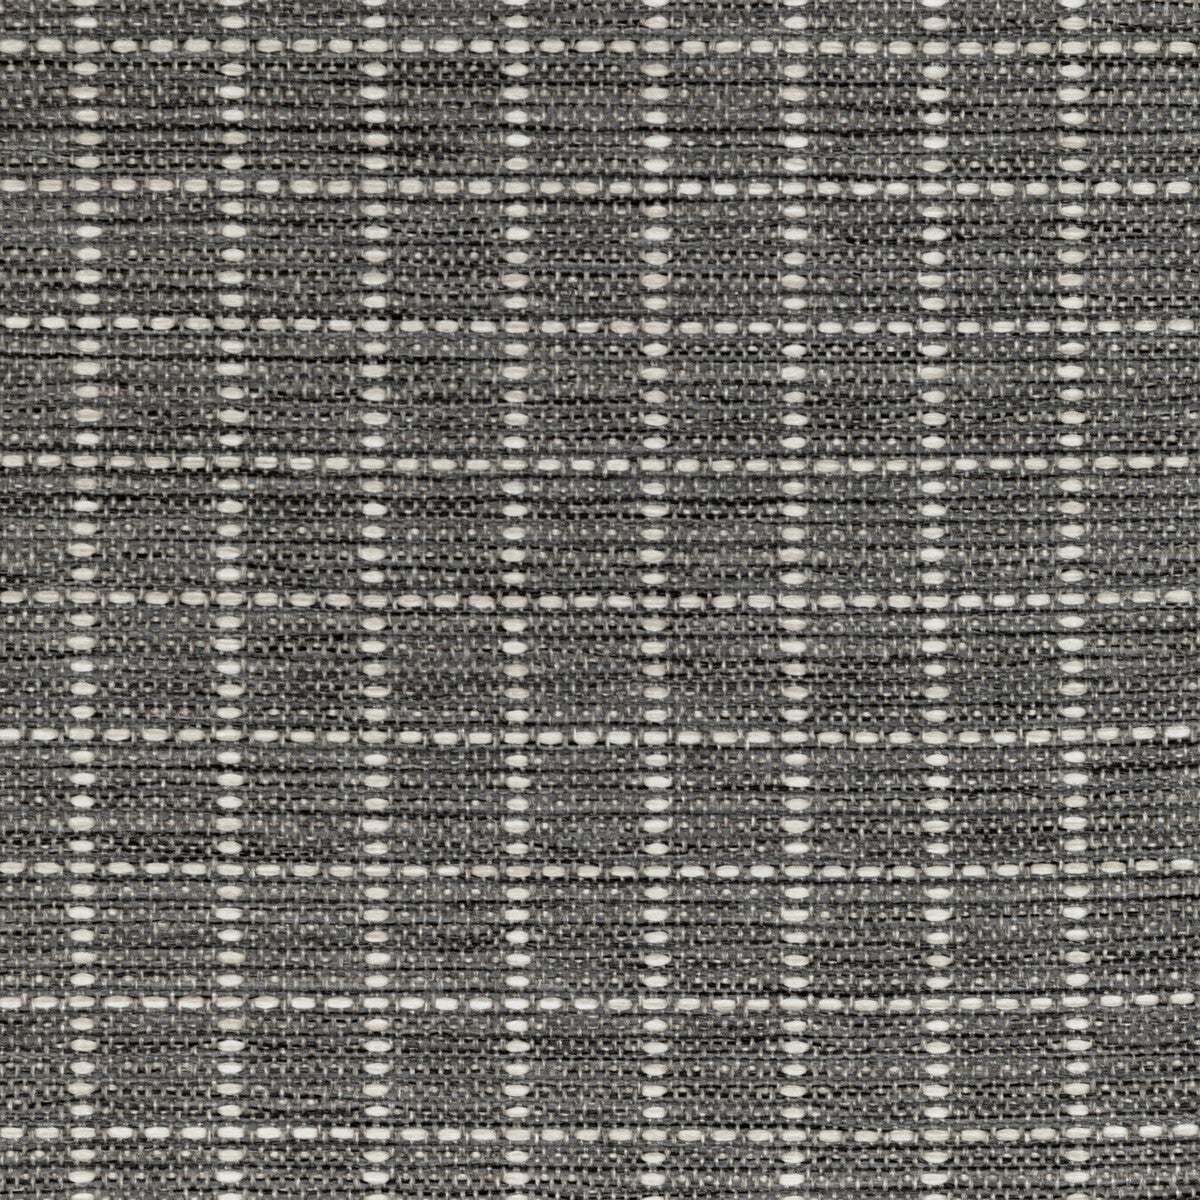 Kravet Smart fabric in 36304-21 color - pattern 36304.21.0 - by Kravet Smart in the Performance Crypton Home collection